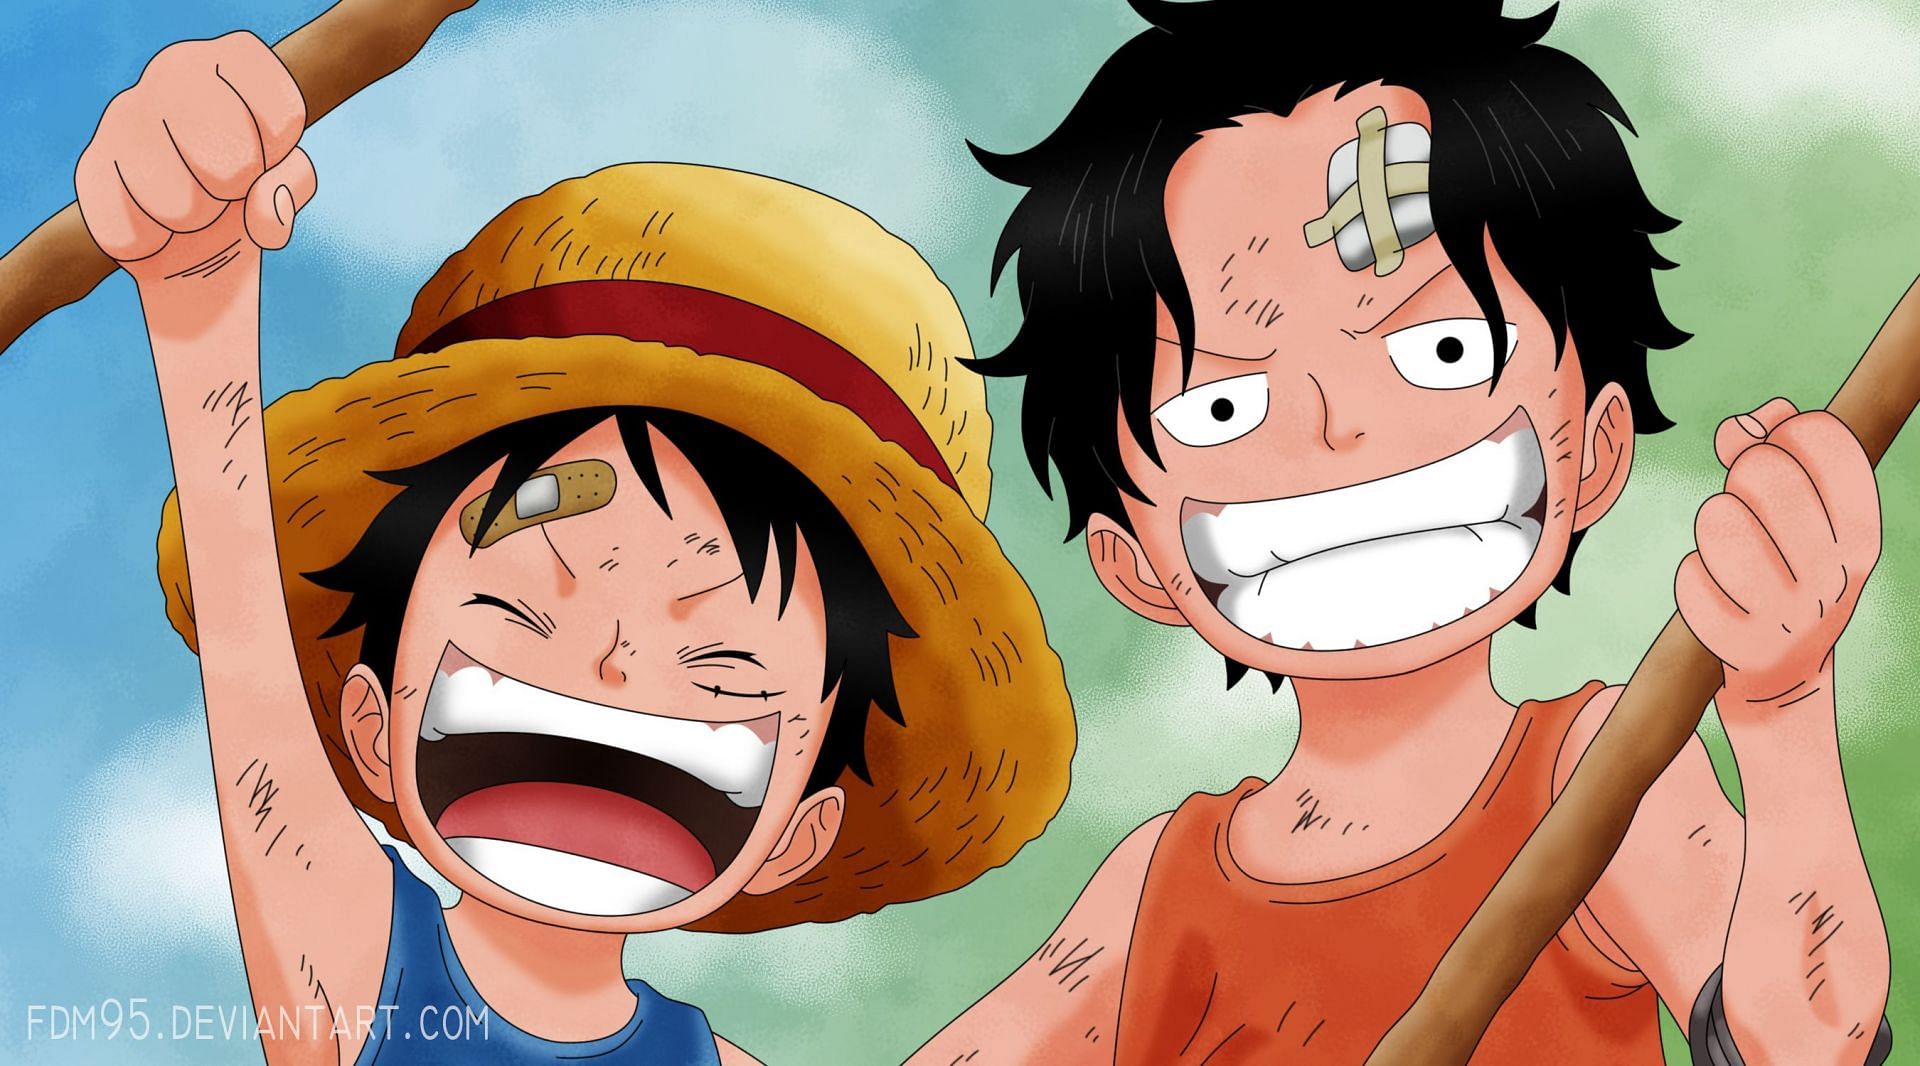 Luffy and Ace in their childhood, as seen in the anime One Piece (Image via Toei Animation)